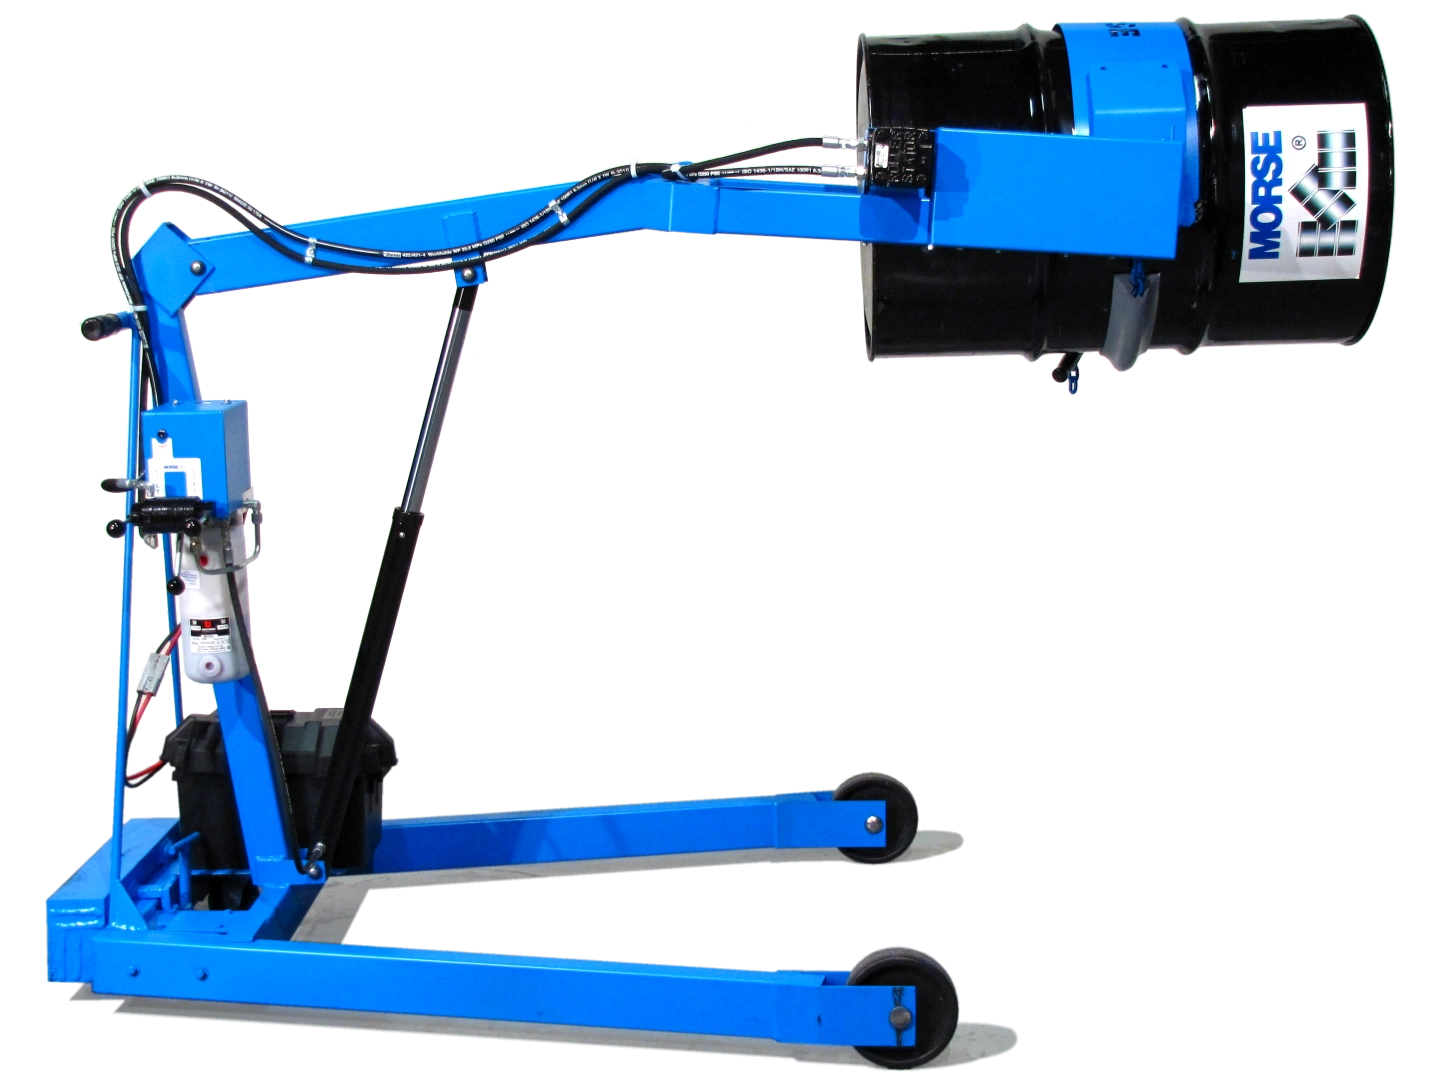 Custom Hydra-Lift Karrier with Extended Reach - Model 400S-XR-115 shown